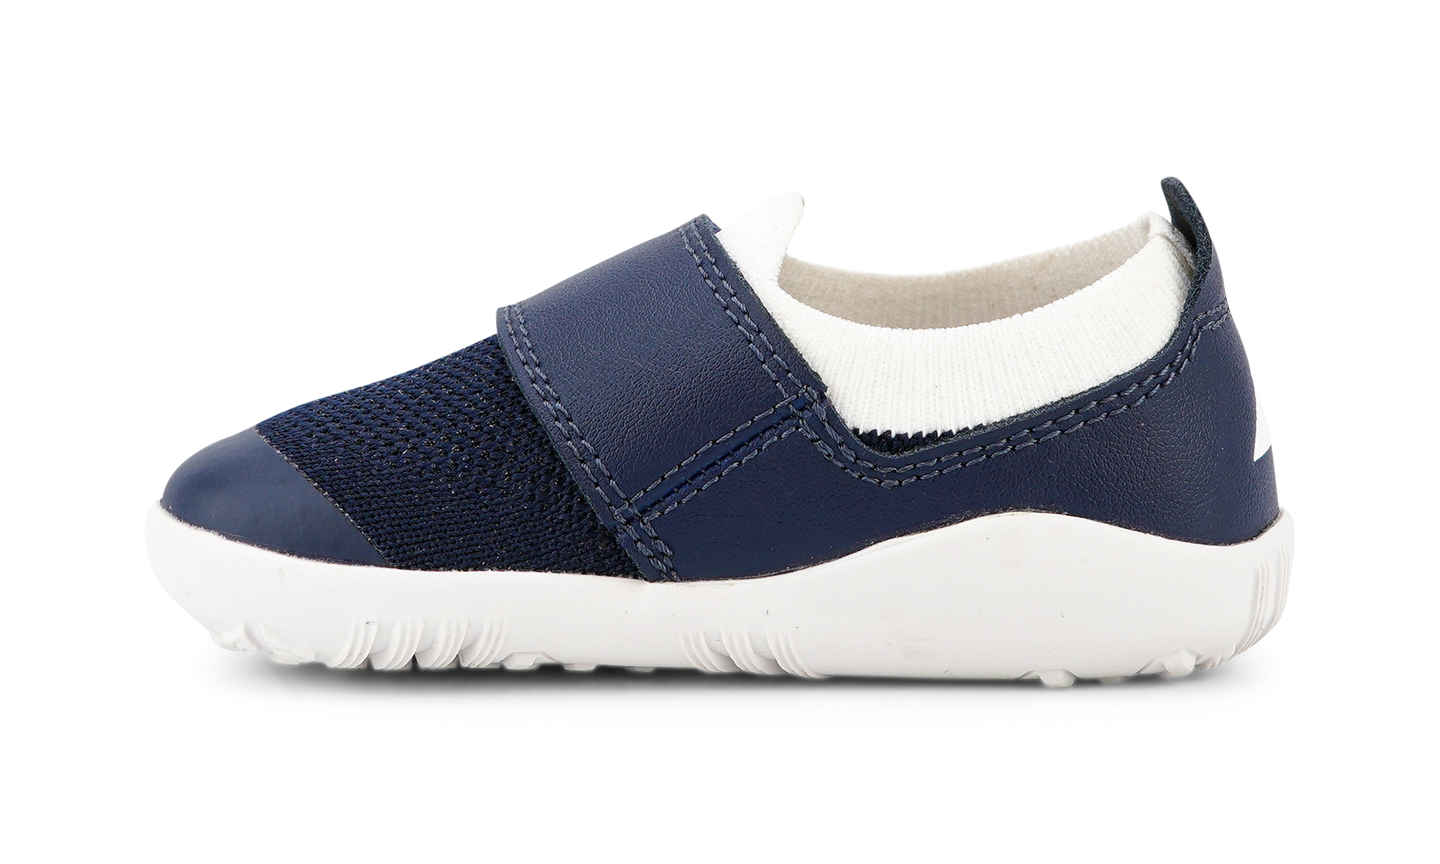 Step Up Dimension III Navy + White